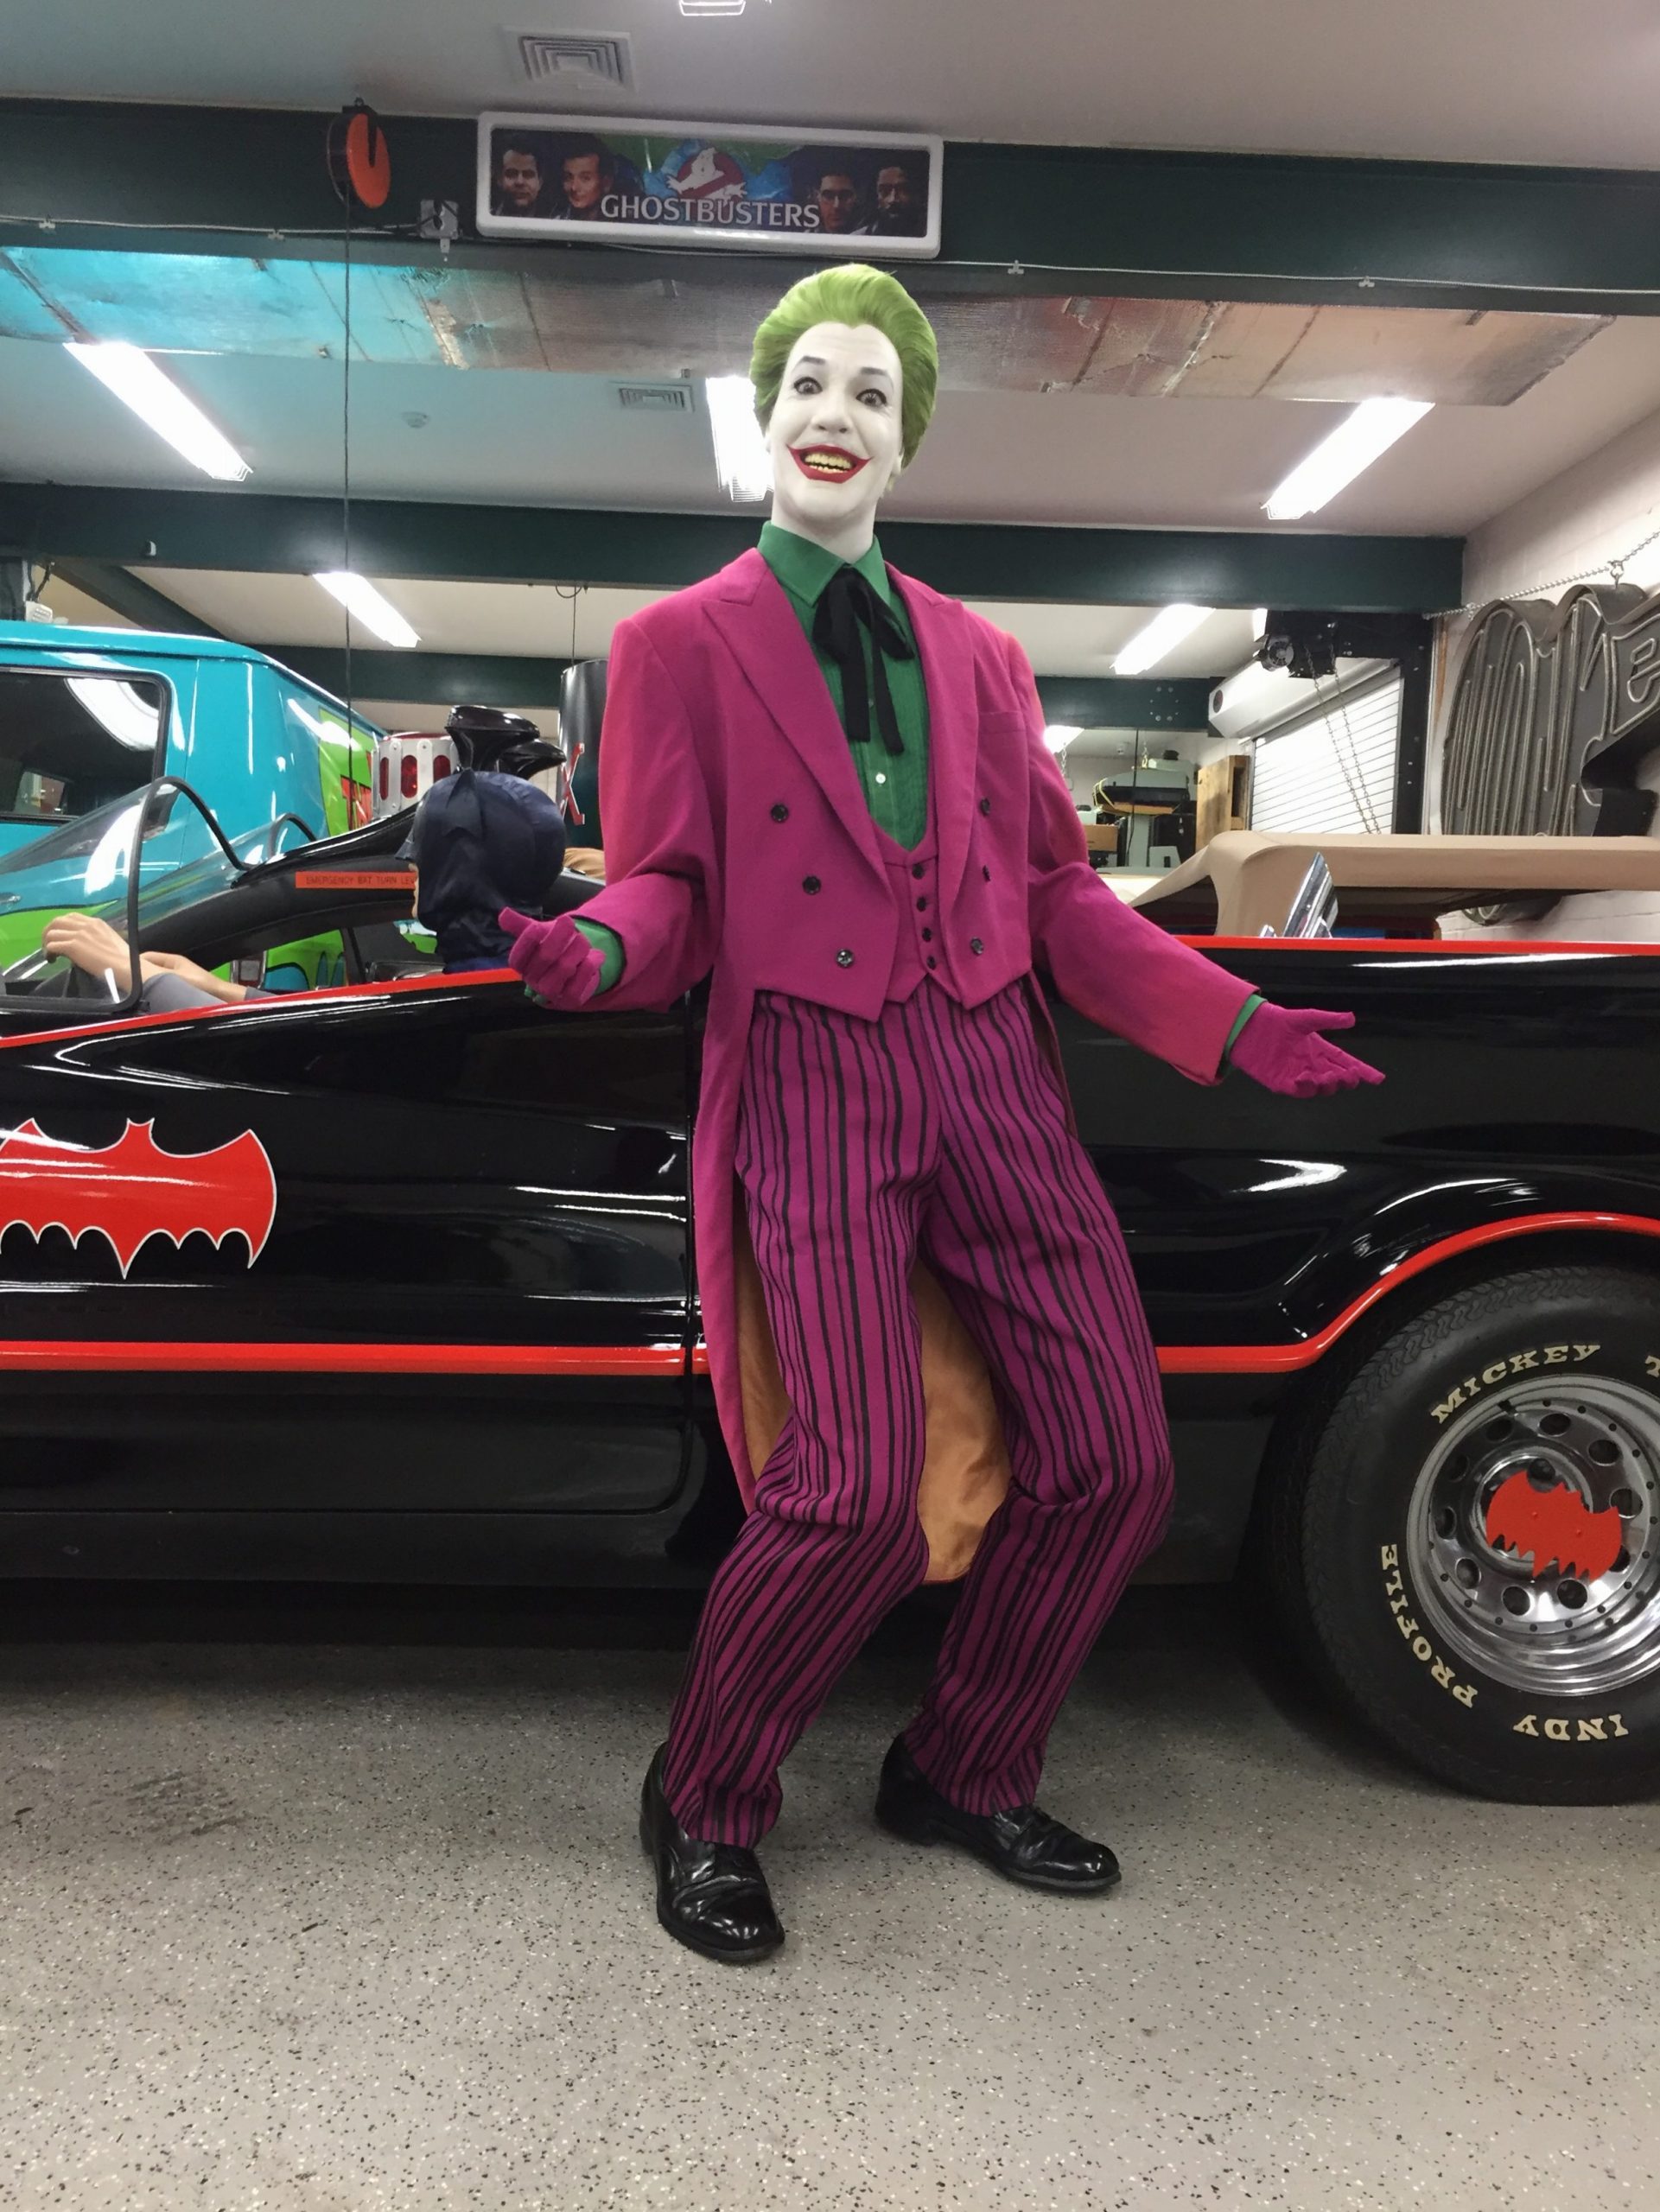 The joker outfit